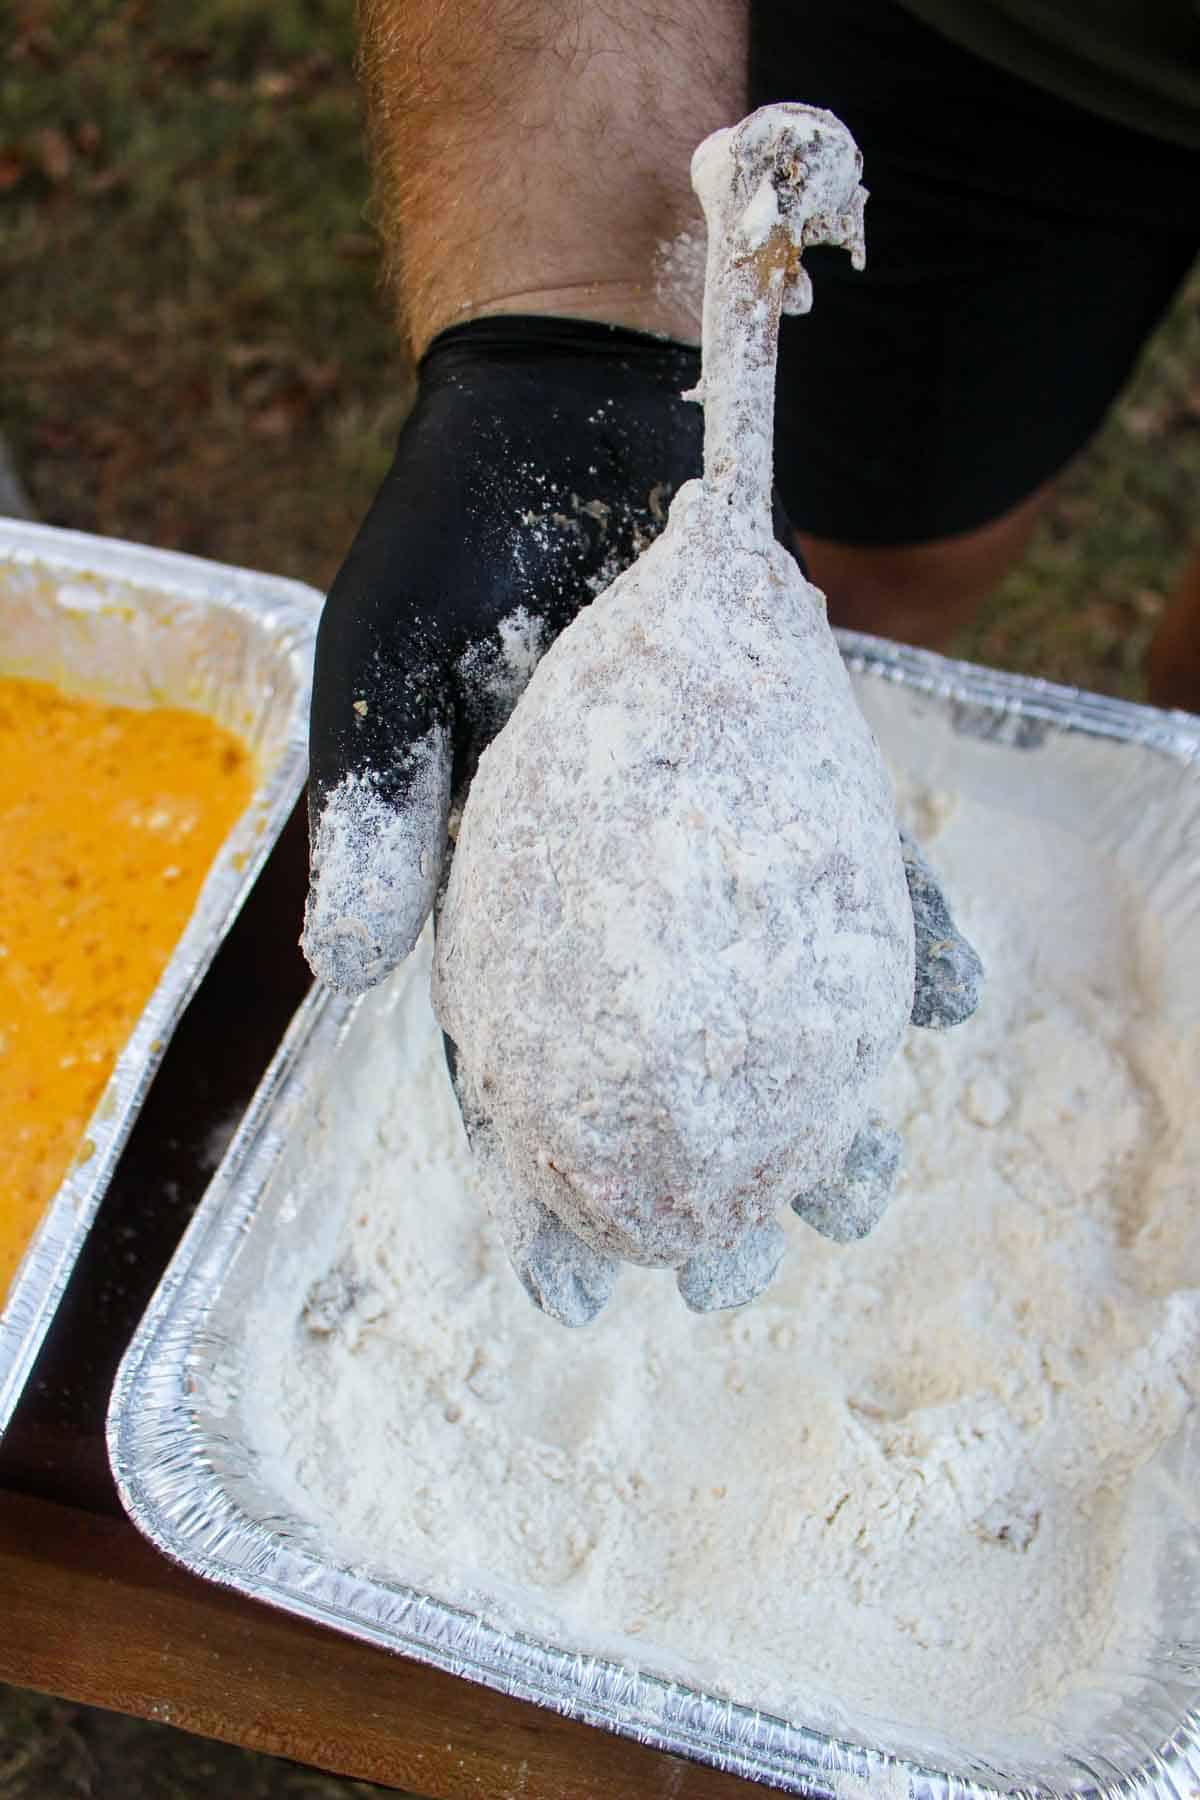 The turkey leg covered in a light layer of flour.